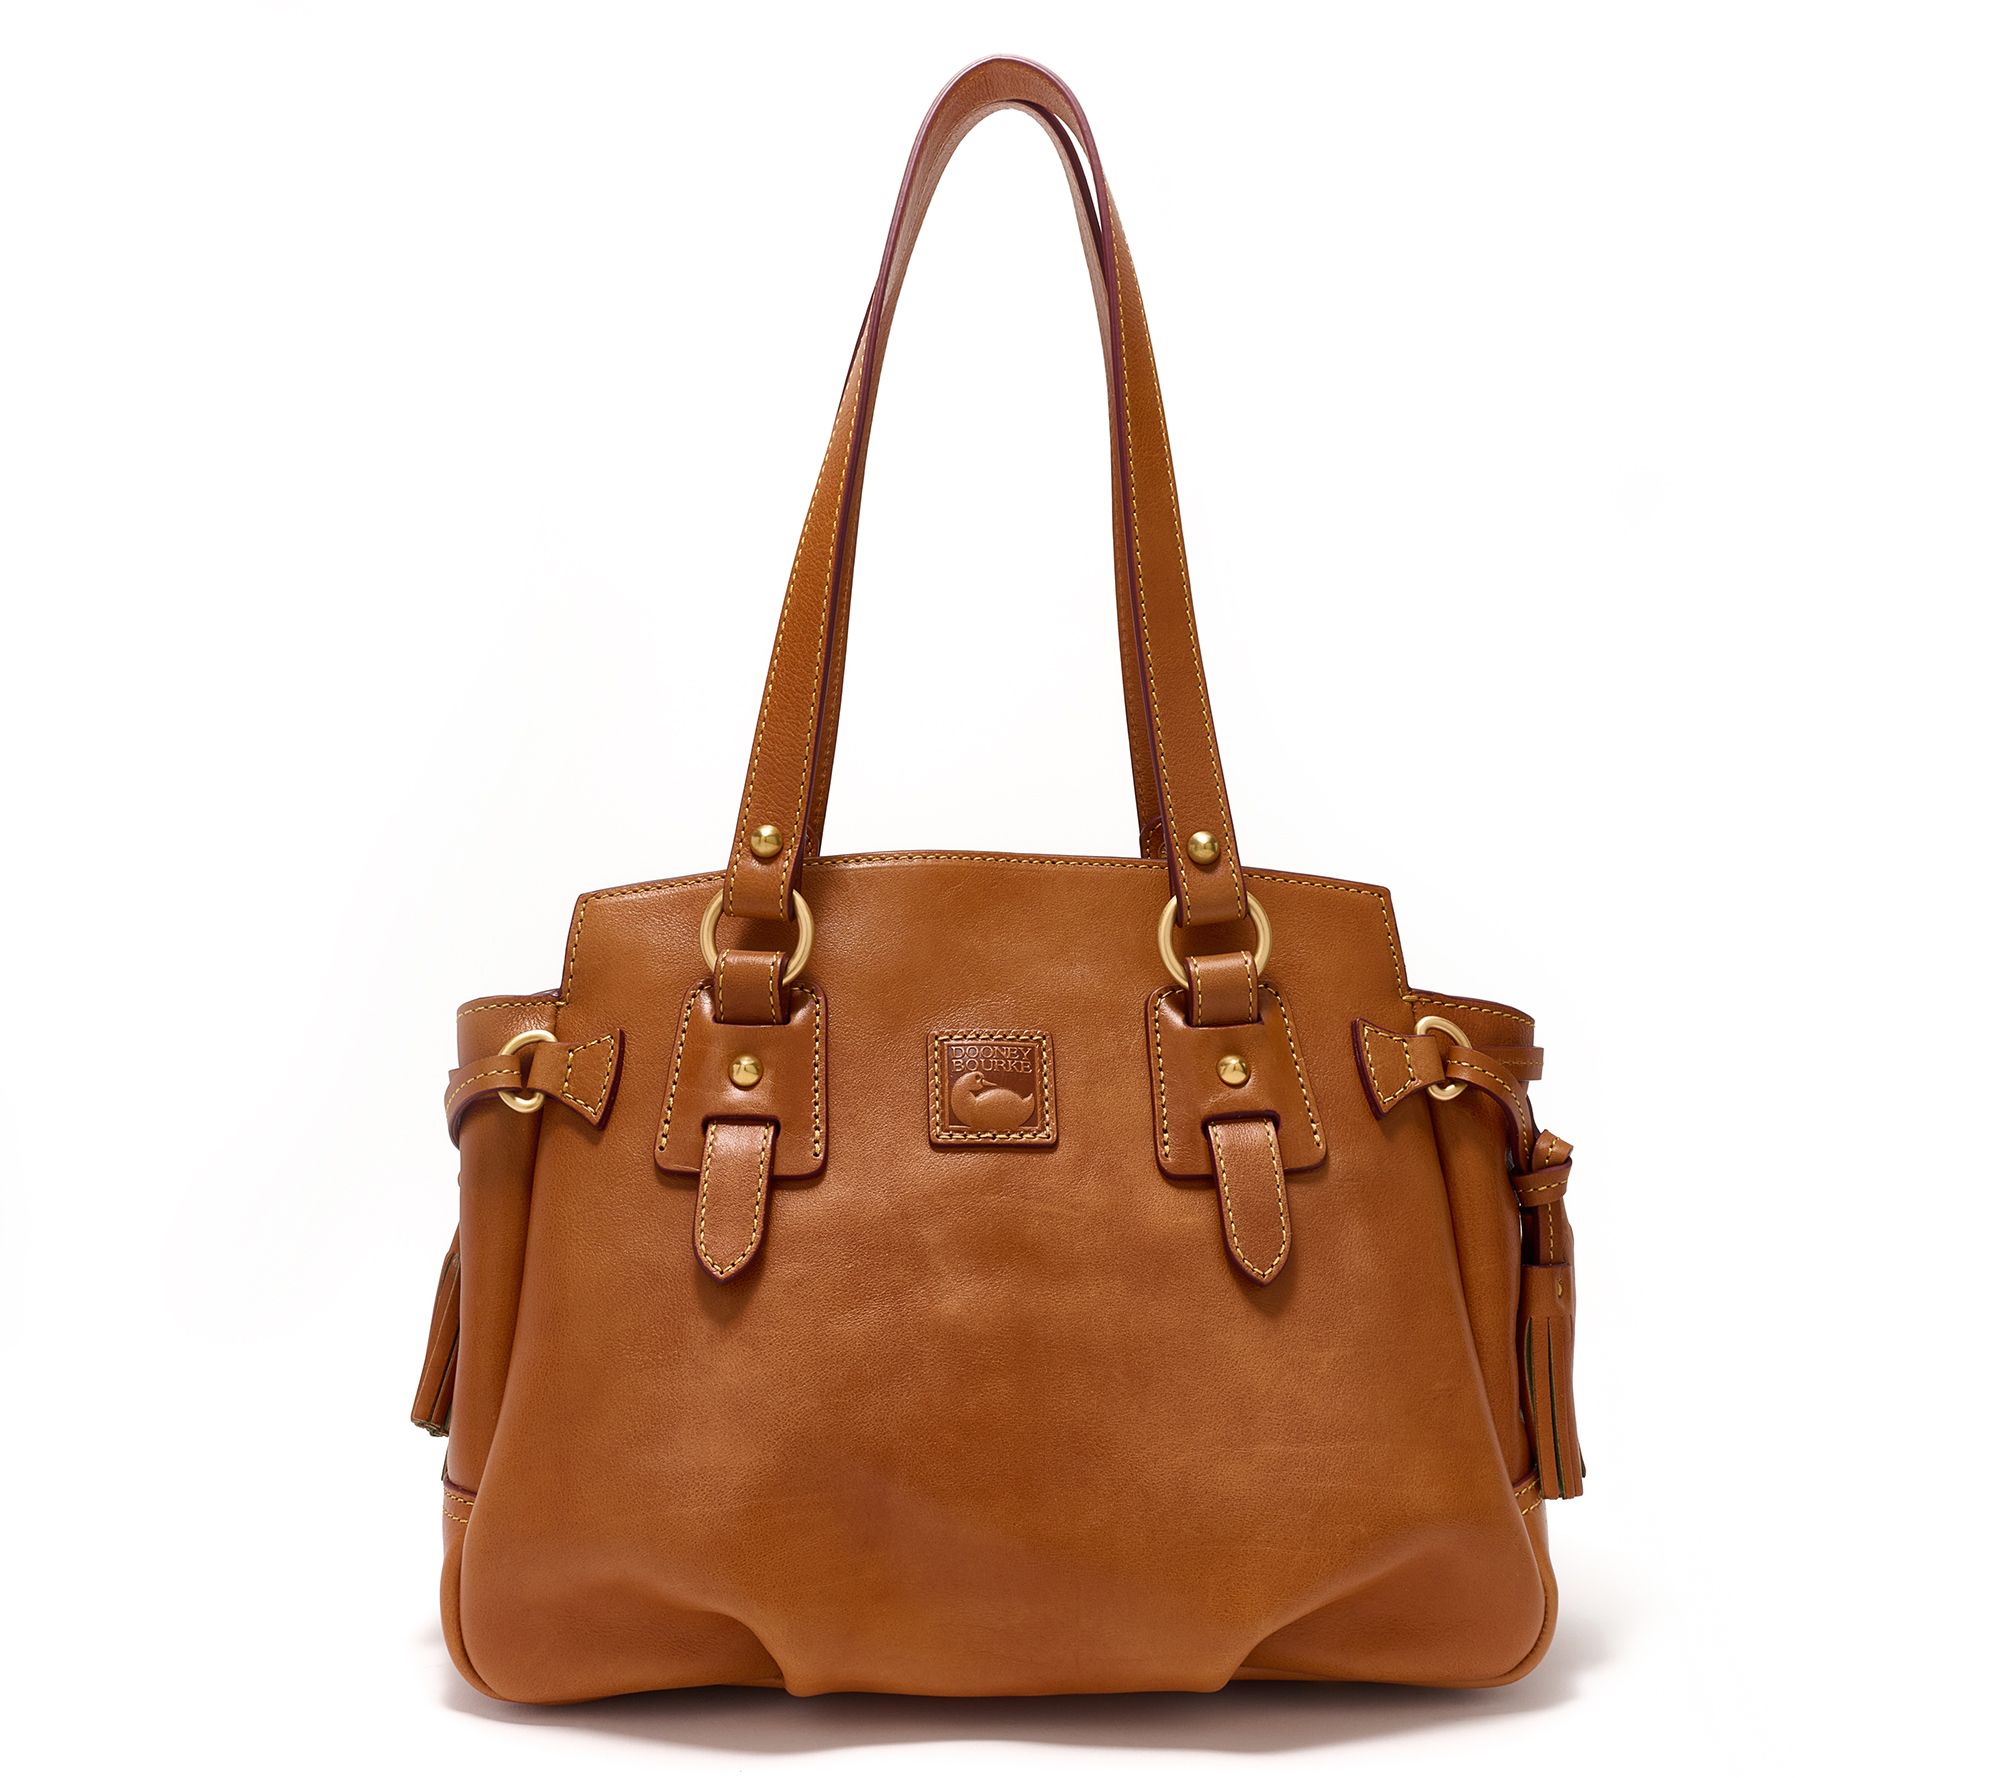 Dooney & Bourke Signature Fabric Double Pocket Tote Brown *moro Leather -  $195 - From Katie